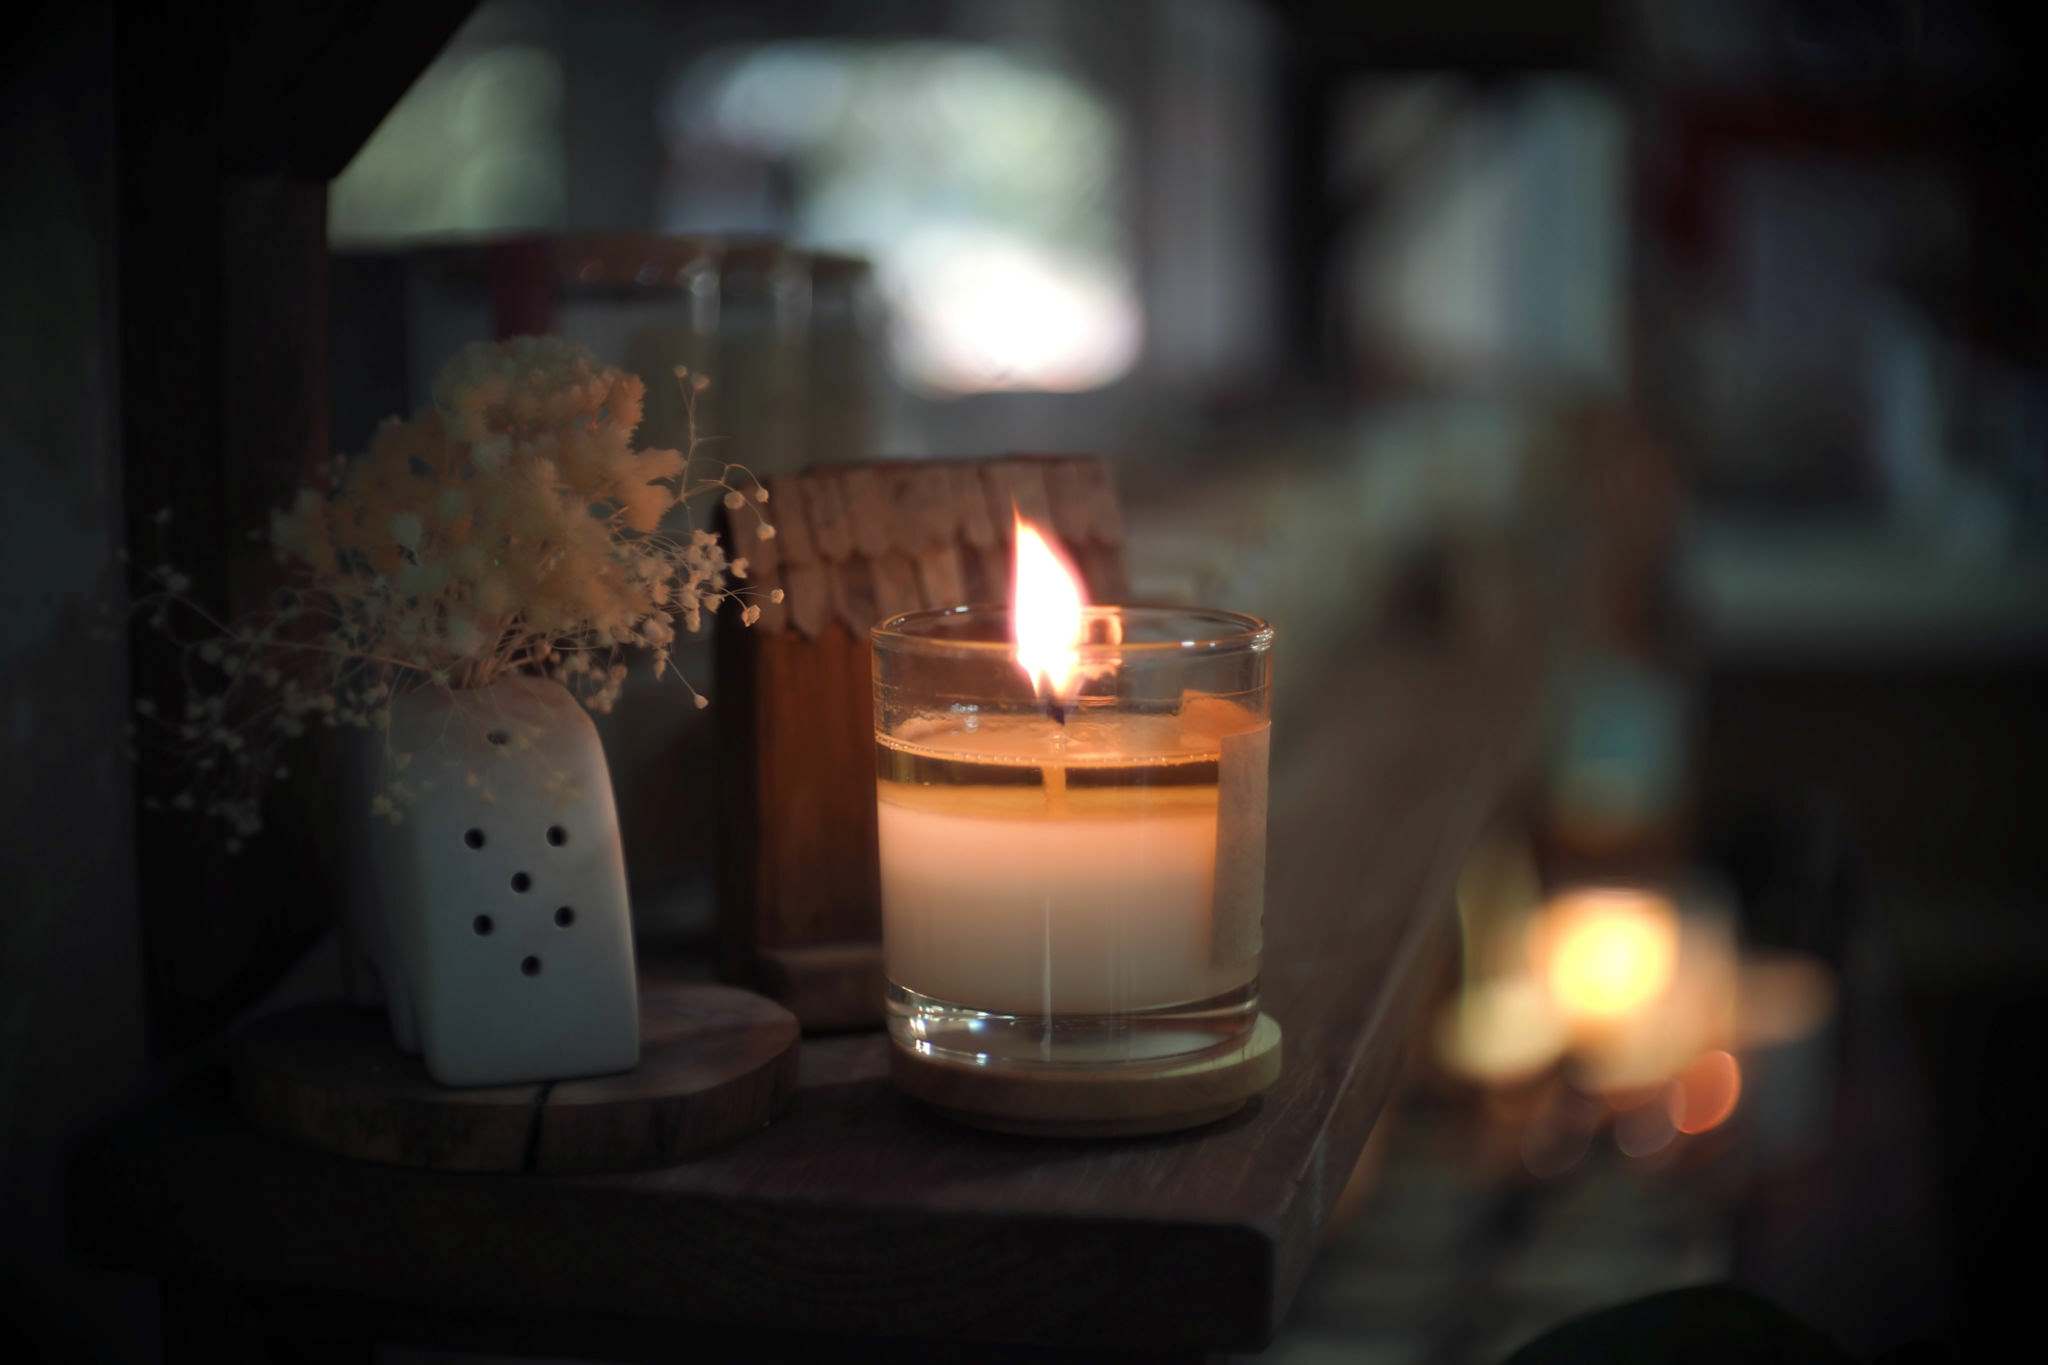 fragrance candle